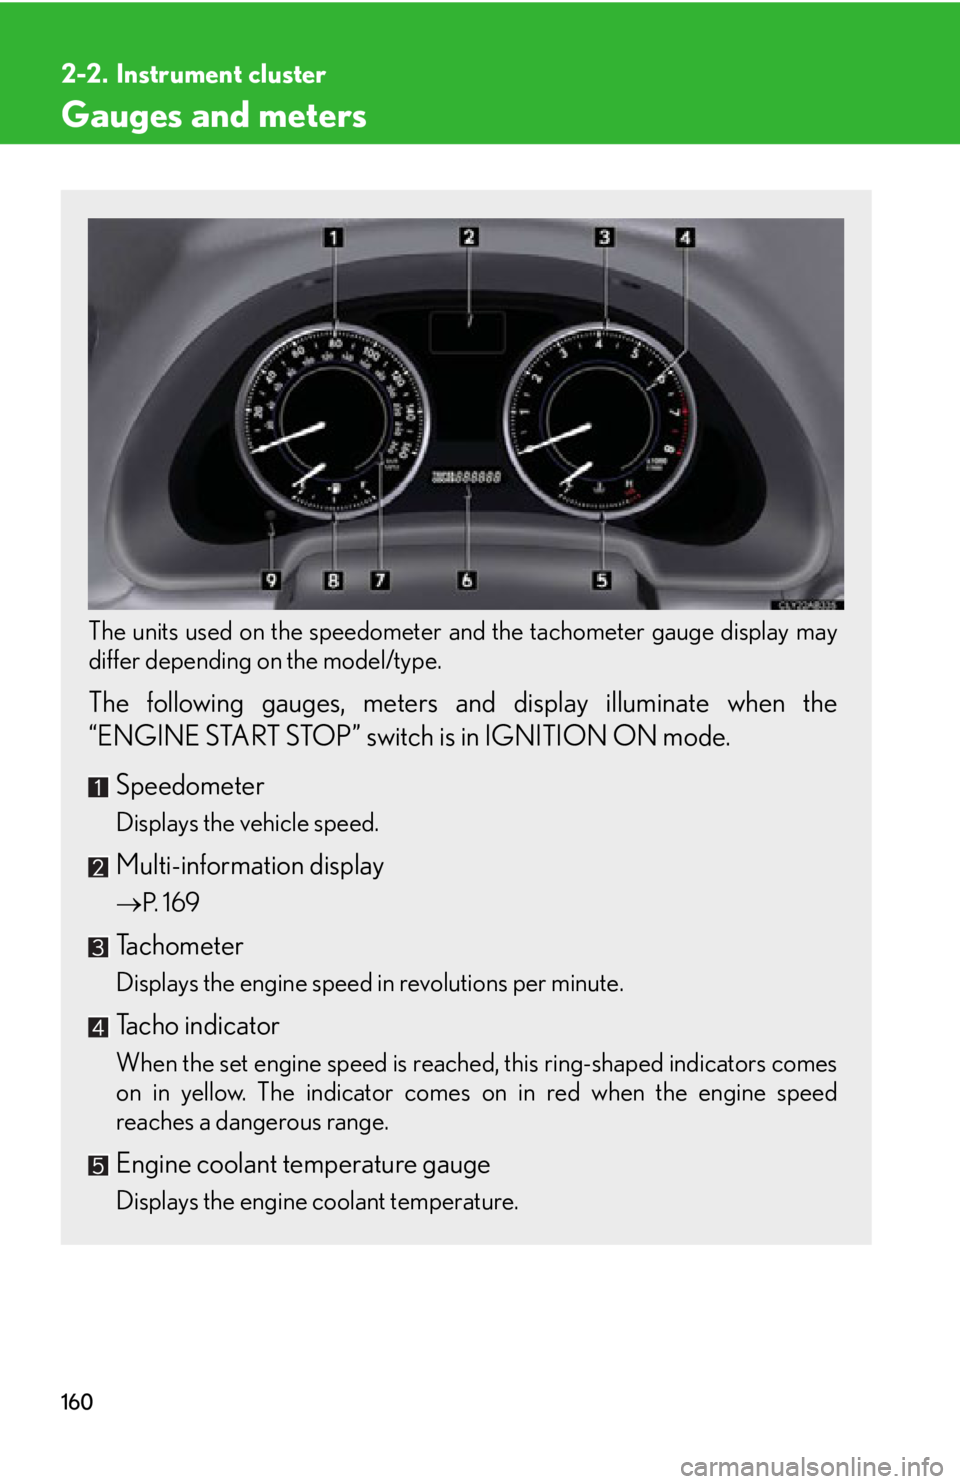 Lexus IS250C 2010  Do-It-Yourself Maintenance / LEXUS 2010 IS350C/250C OWNERS MANUAL (OM53A20U) 160
2-2. Instrument cluster
Gauges and meters
The units used on the speedometer and the tachometer gauge display may
differ depending on the model/type.
 
The following gauges, meters and  display ill